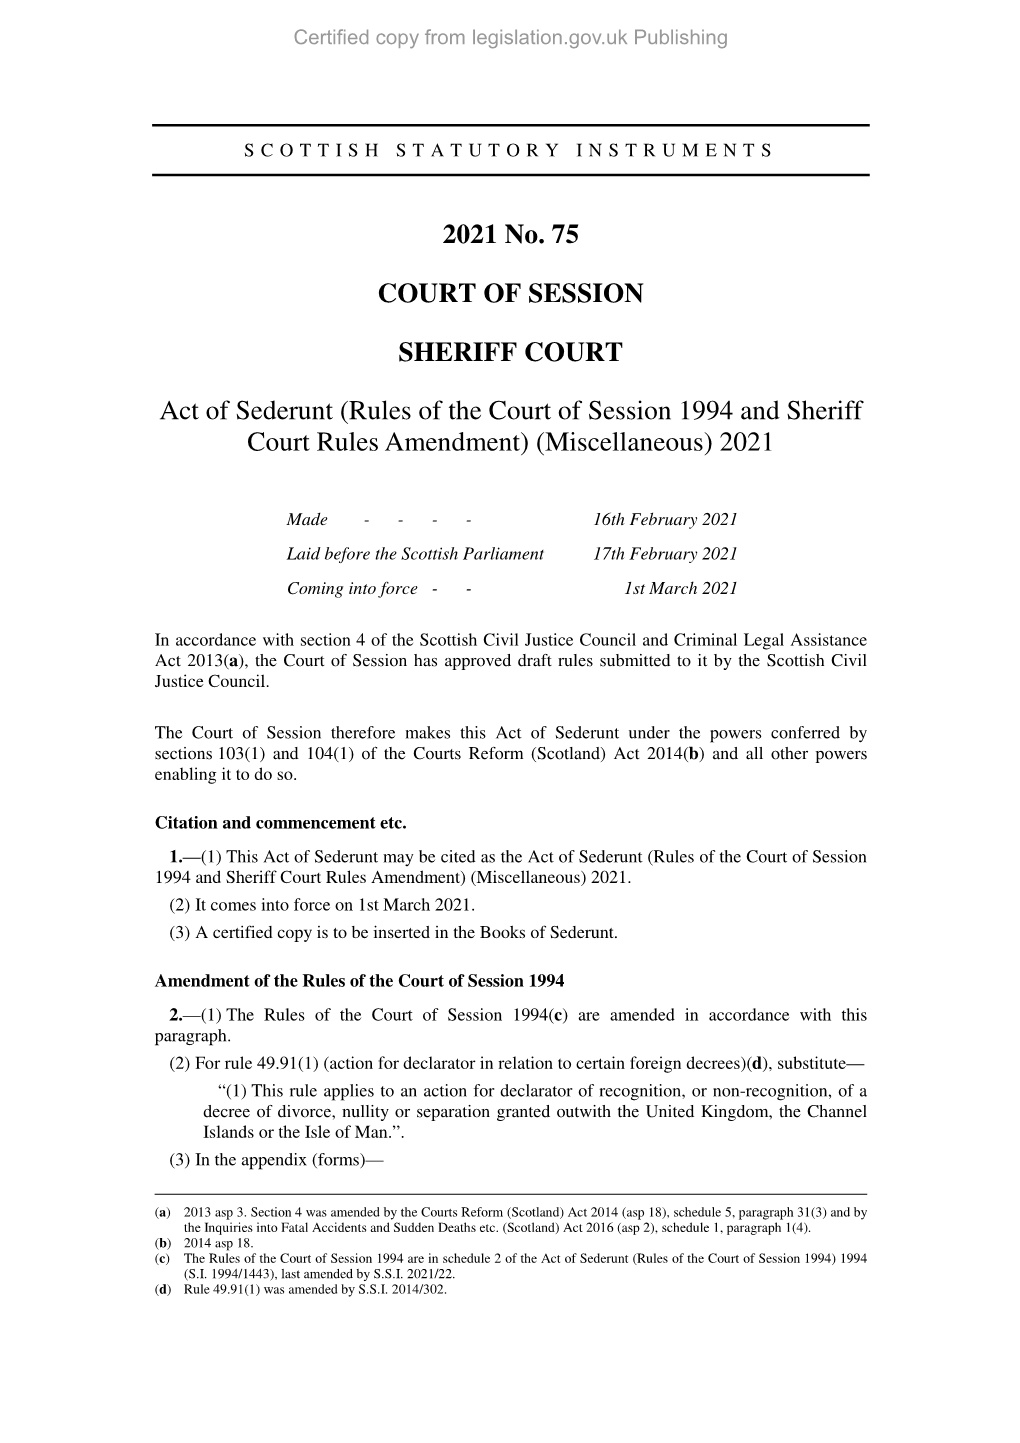 Act of Sederunt (Rules of the Court of Session 1994 and Sheriff Court Rules Amendment) (Miscellaneous) 2021